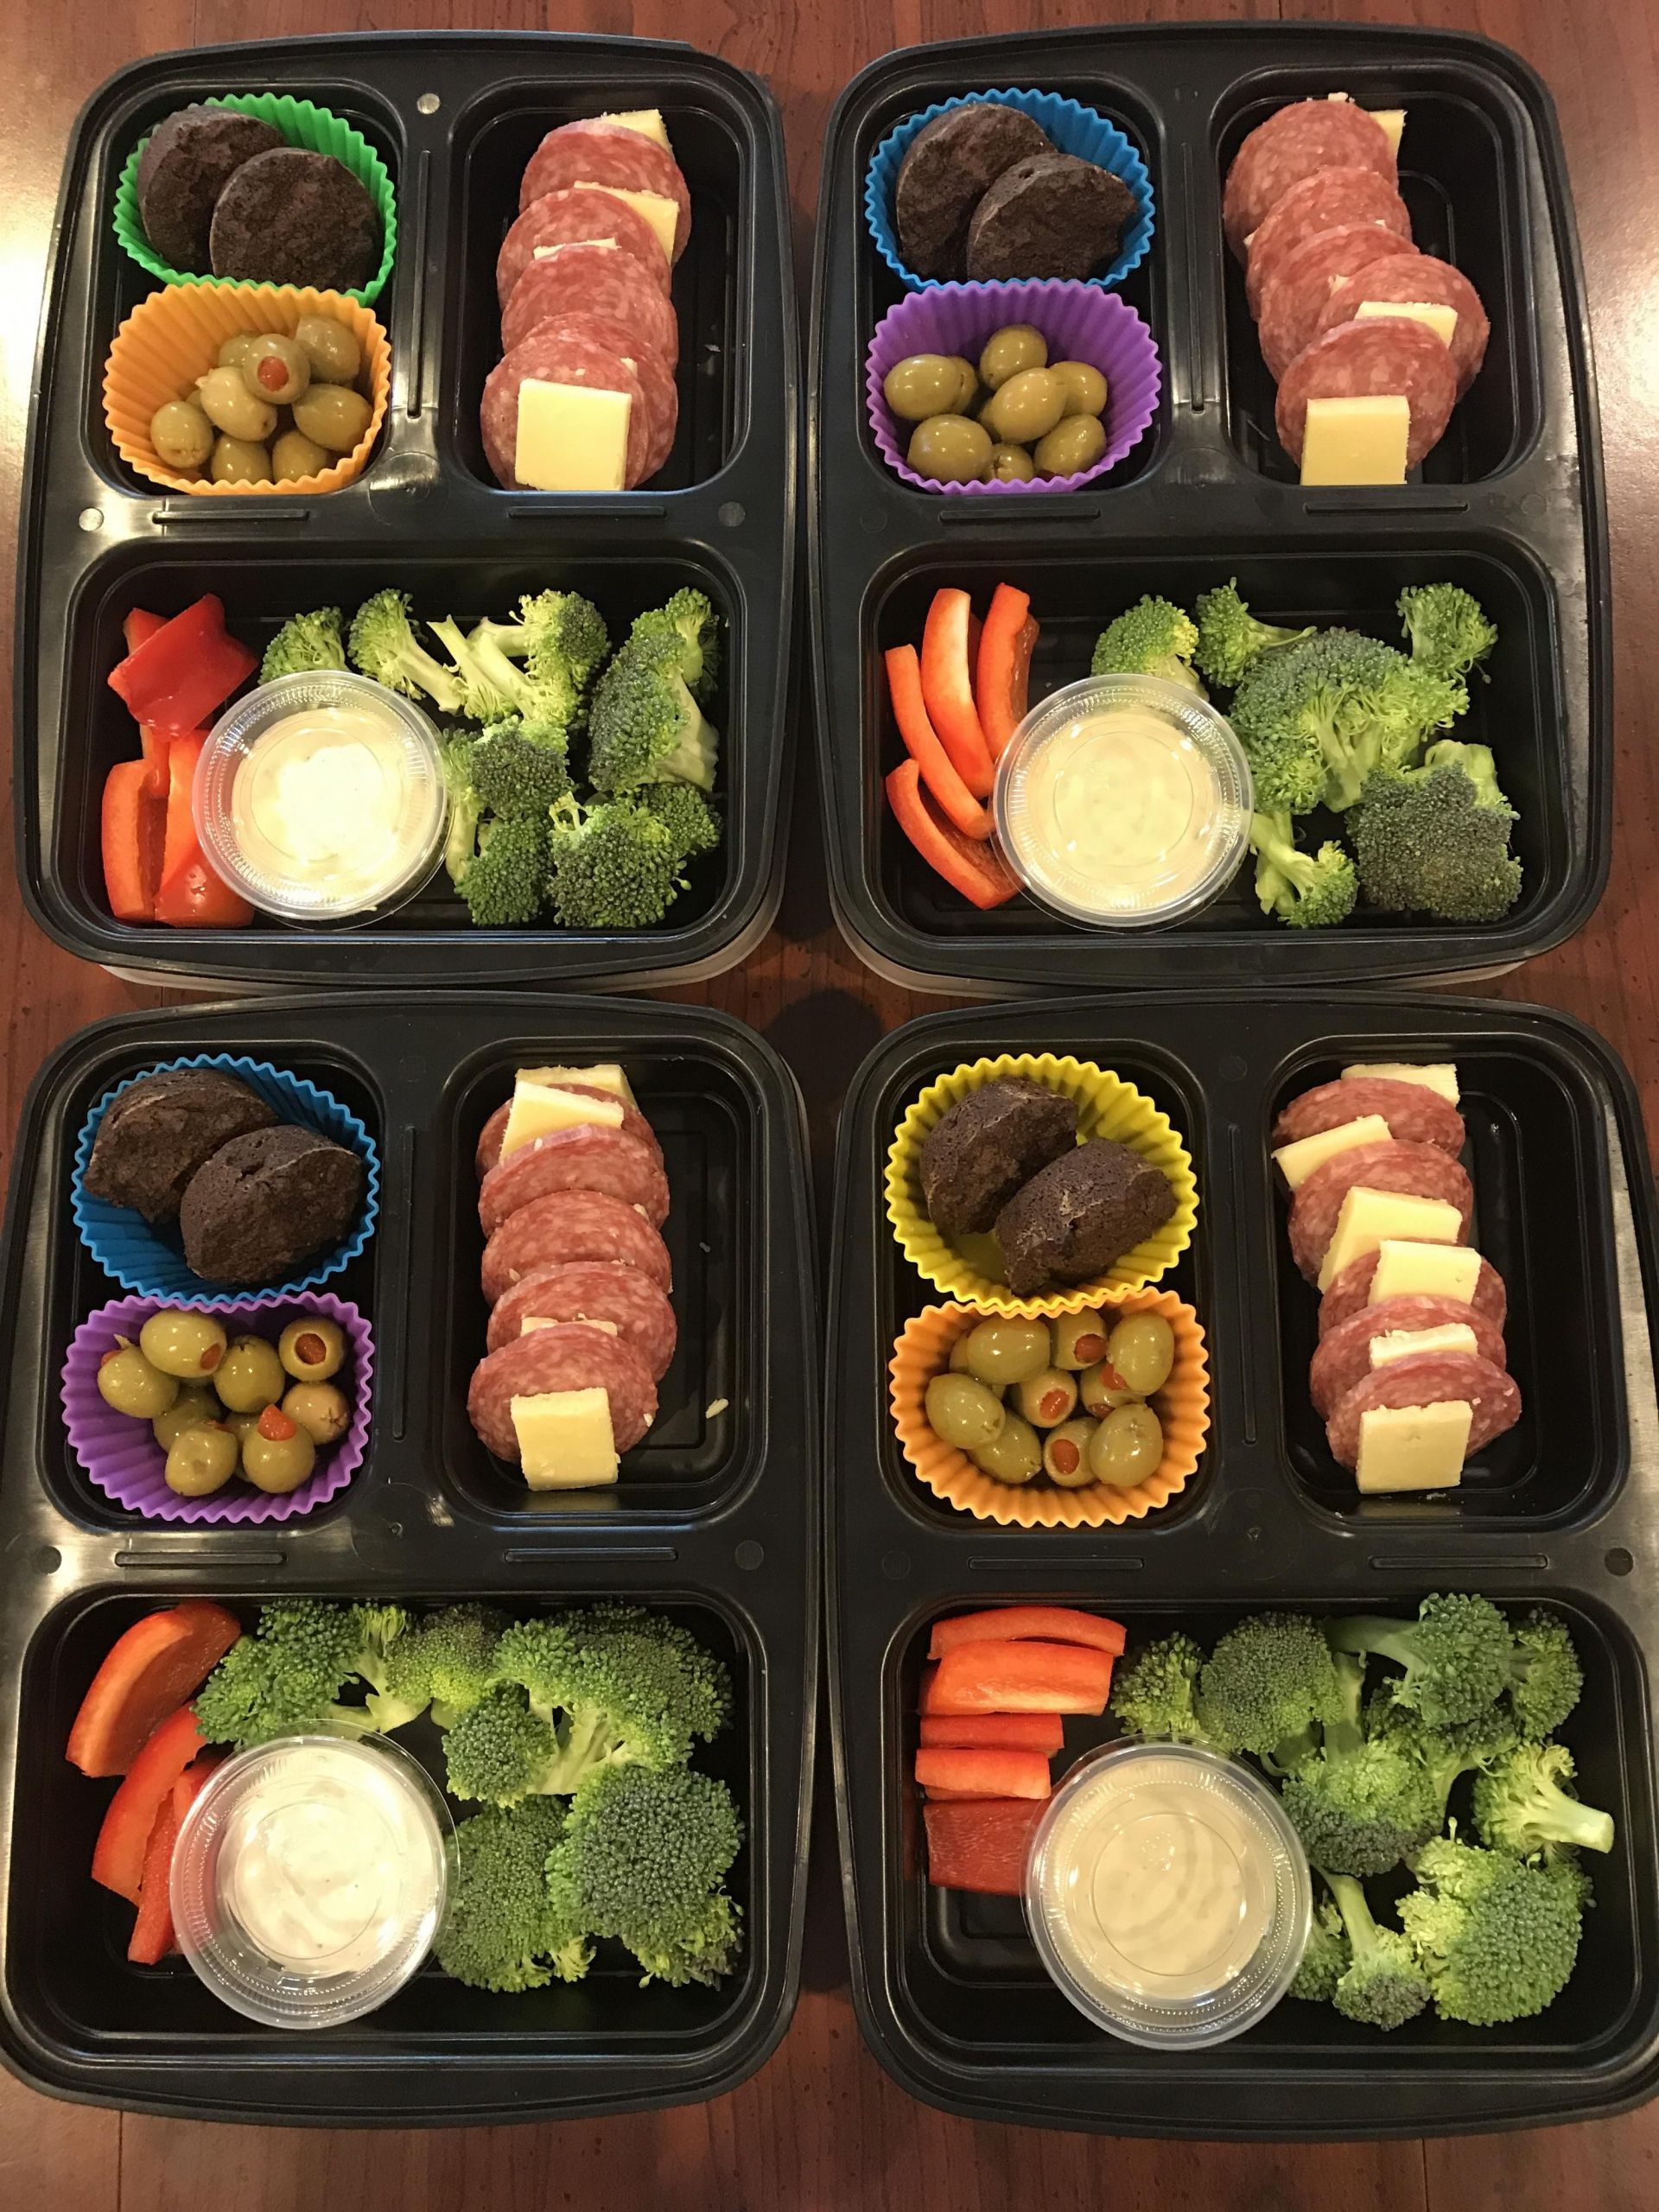 Healthy Keto Meal Prep
 I made my "adult lunchable" keto friendly